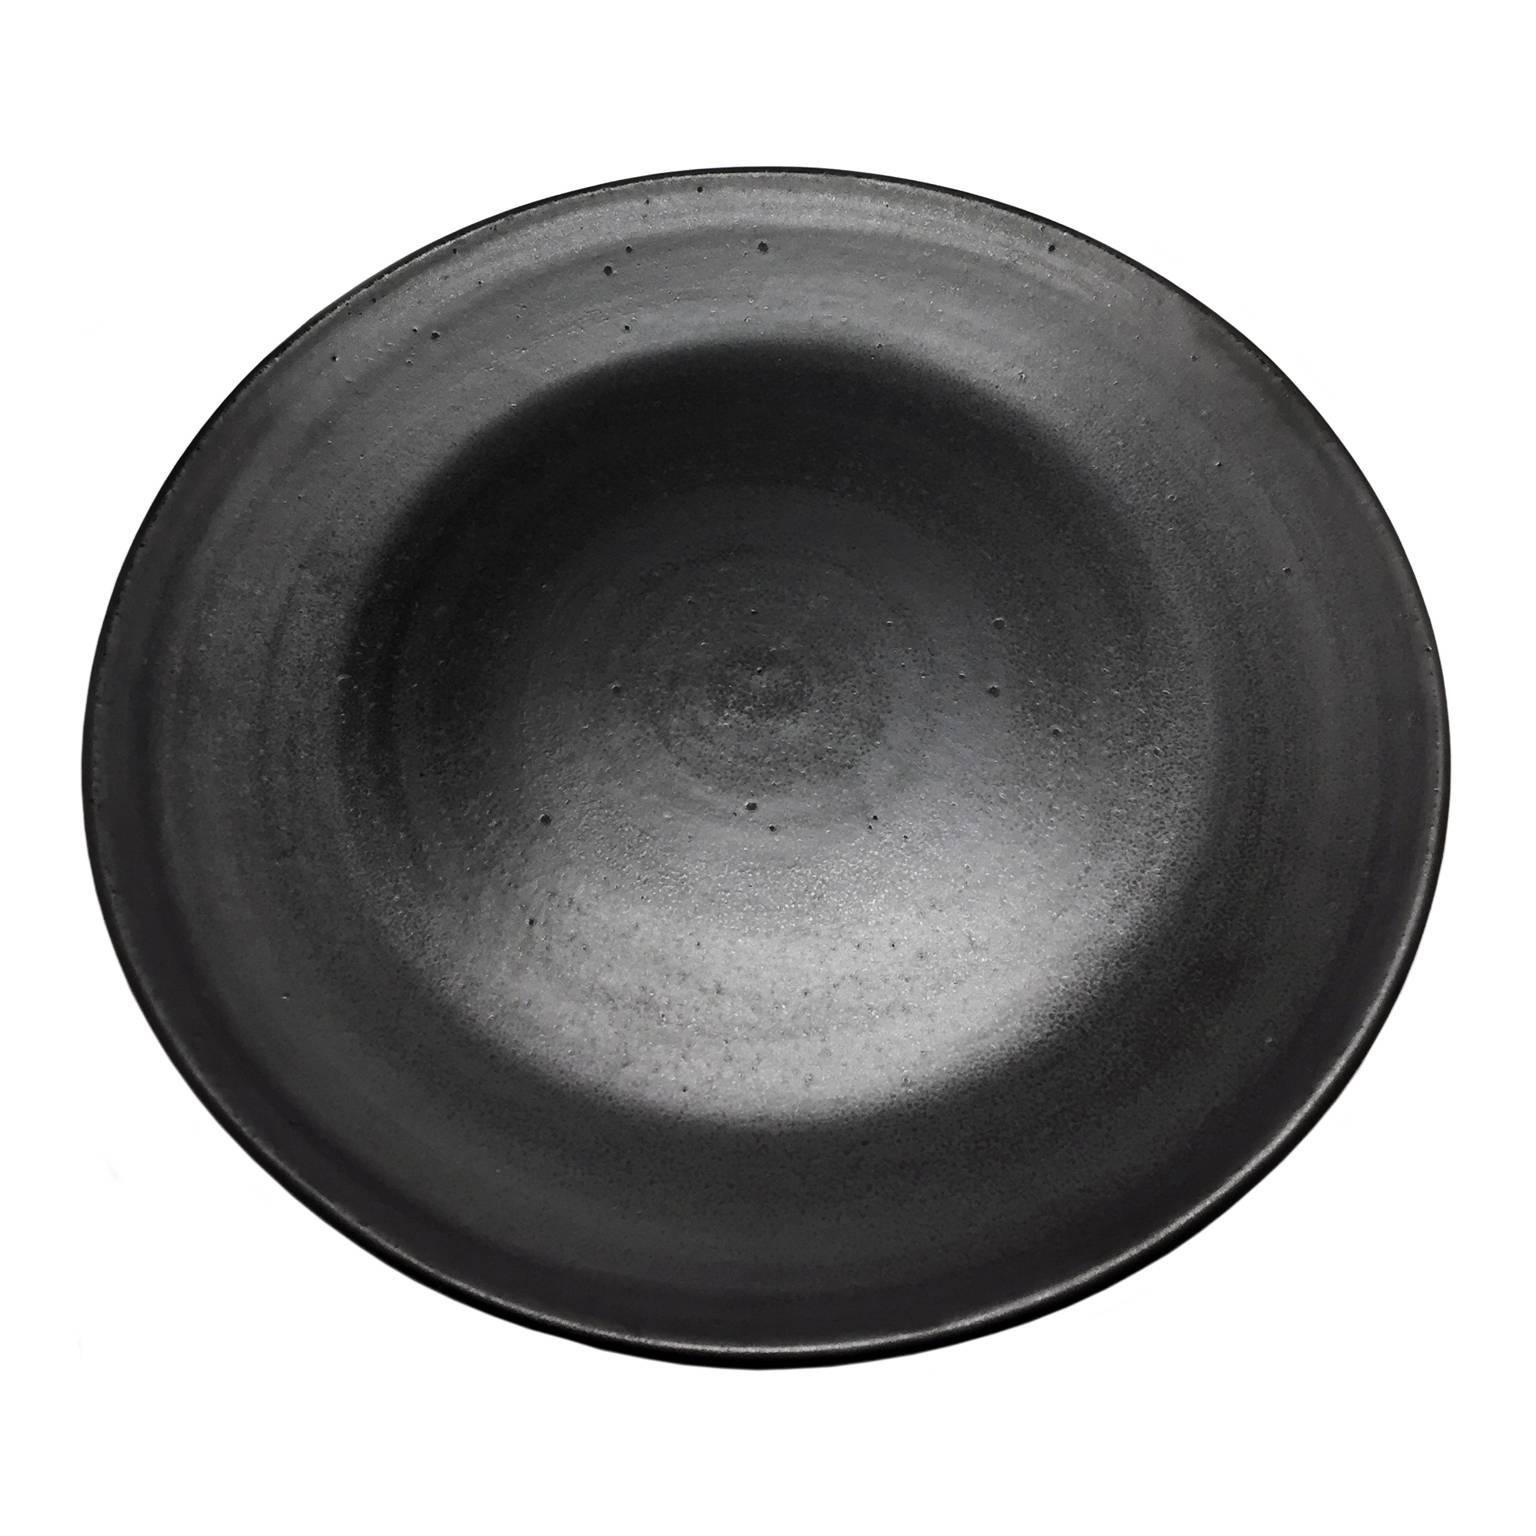 Black wax glaze ceramic round tray by Sandi Fellman, USA, 2016.

Veteran photographer Sandi Fellman's ceramic vessels are an exploration of a new medium. The forms, palettes, and sensuality of her photos can be found within each piece. The tactile